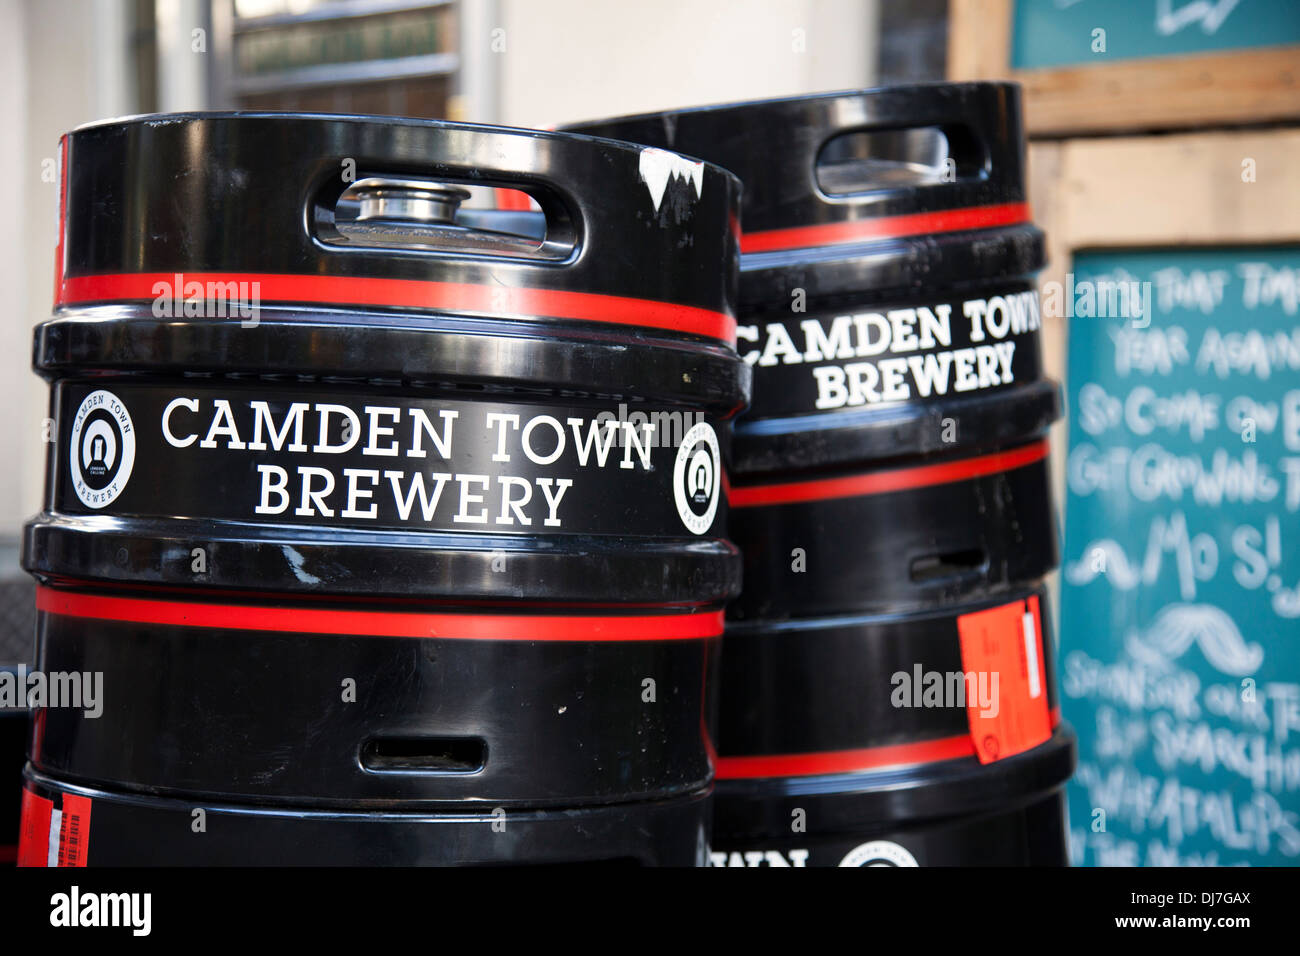 Camden Town Brewery beer kegs outside a bar in London. Stock Photo